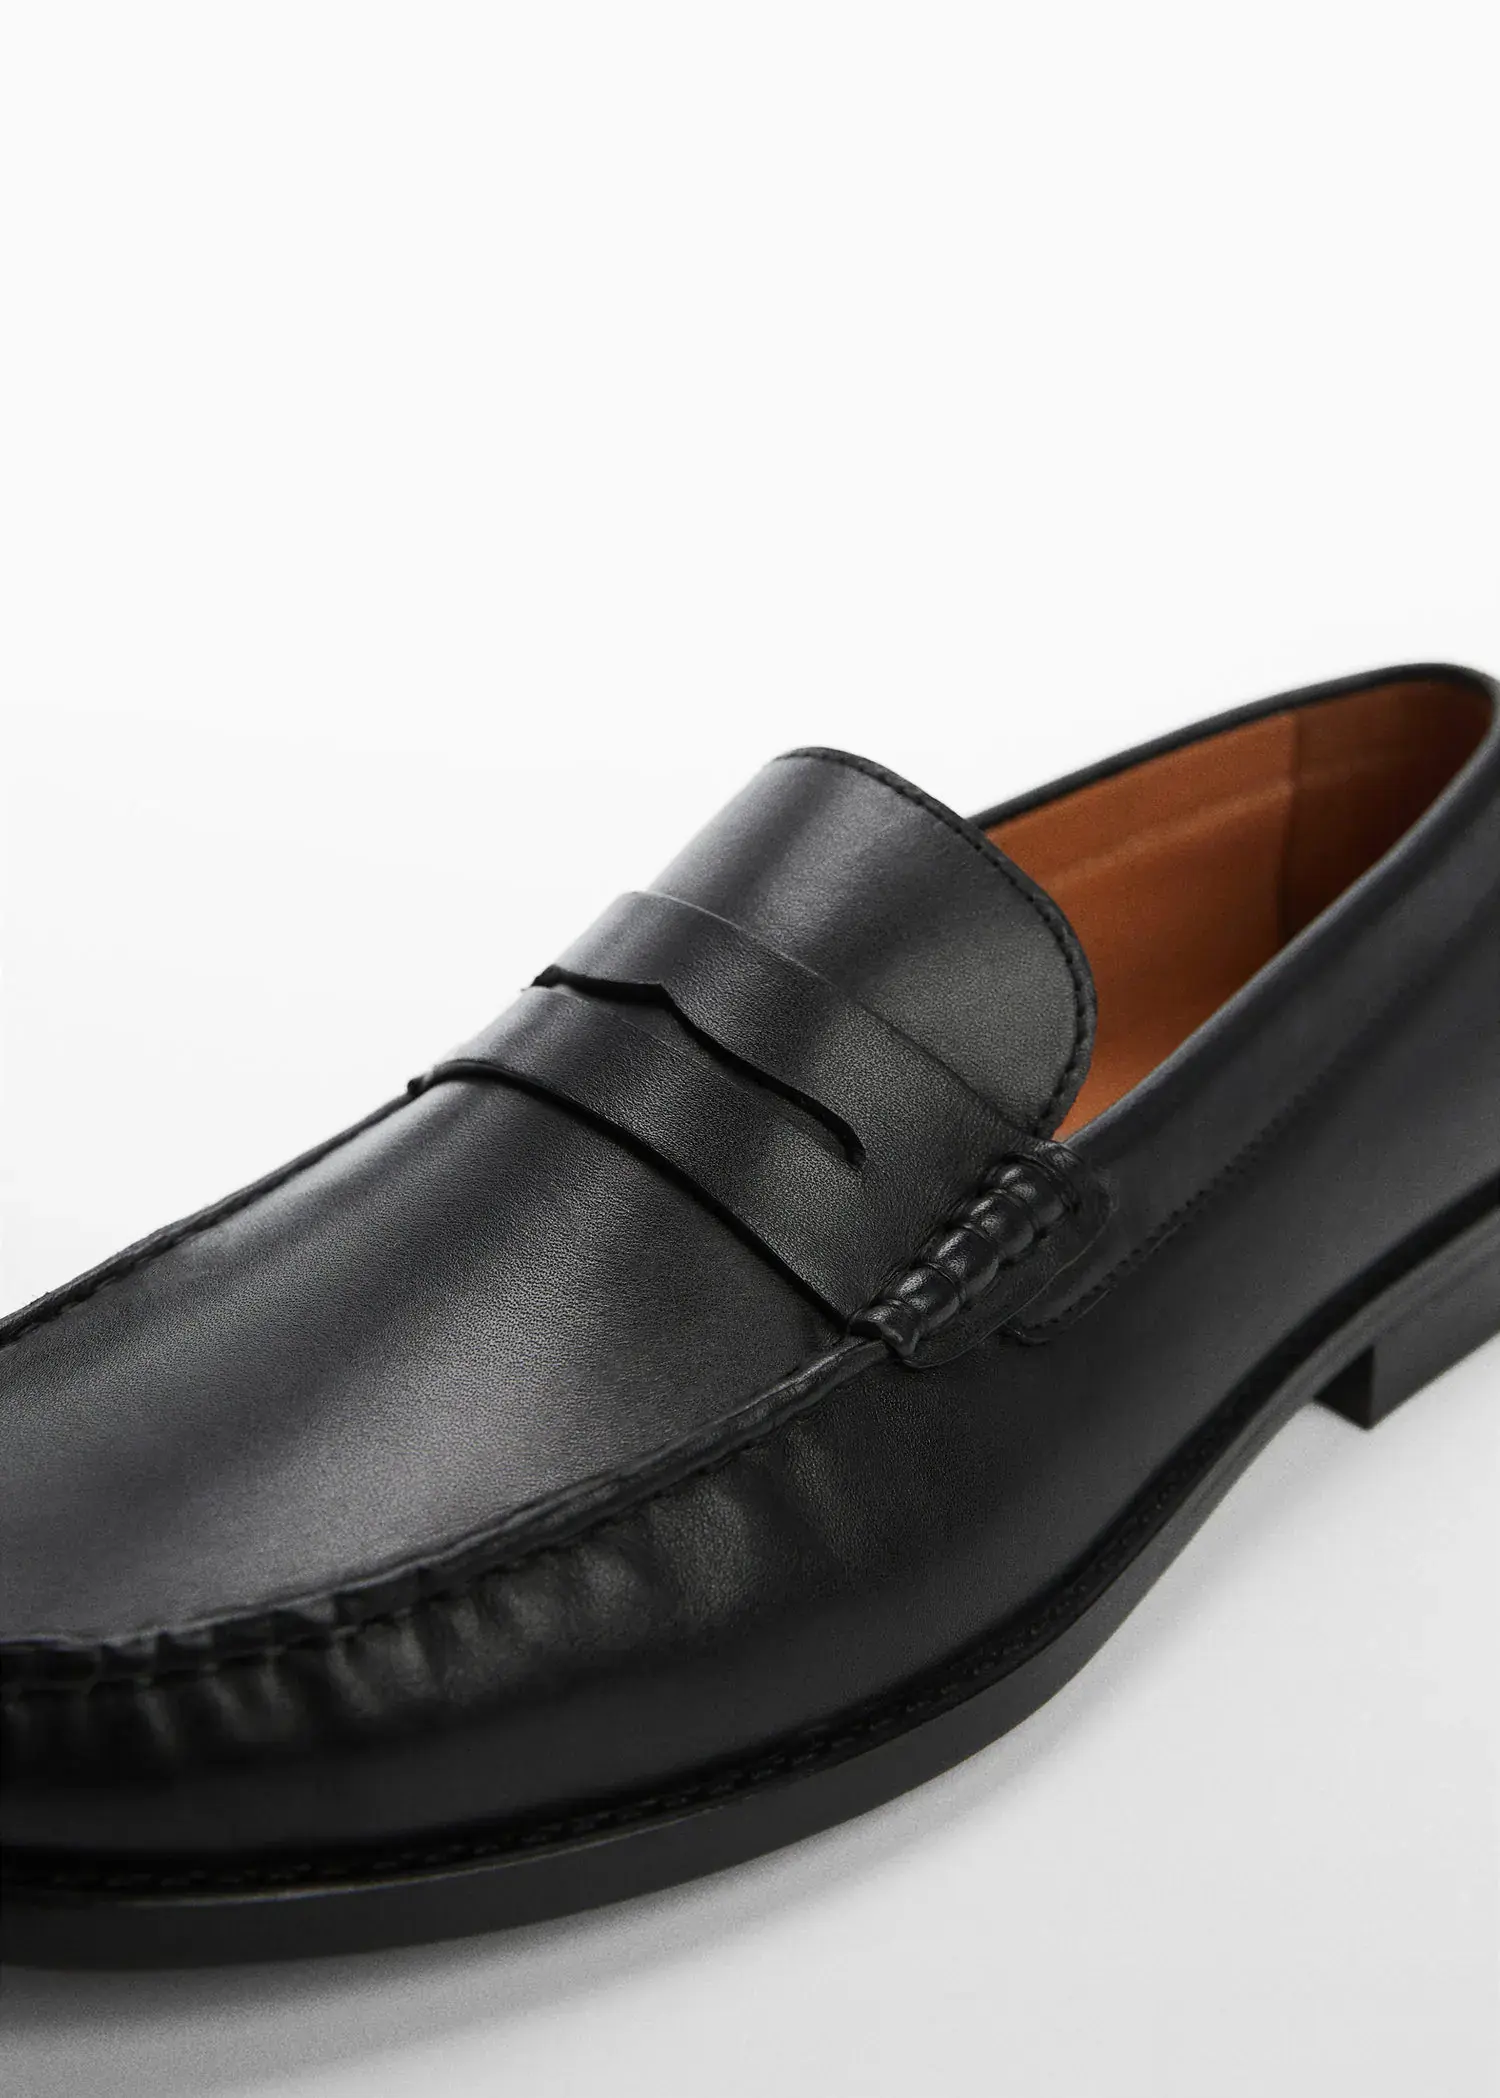 Mango Leather penny loafers. a close-up of a black loafer shoe. 